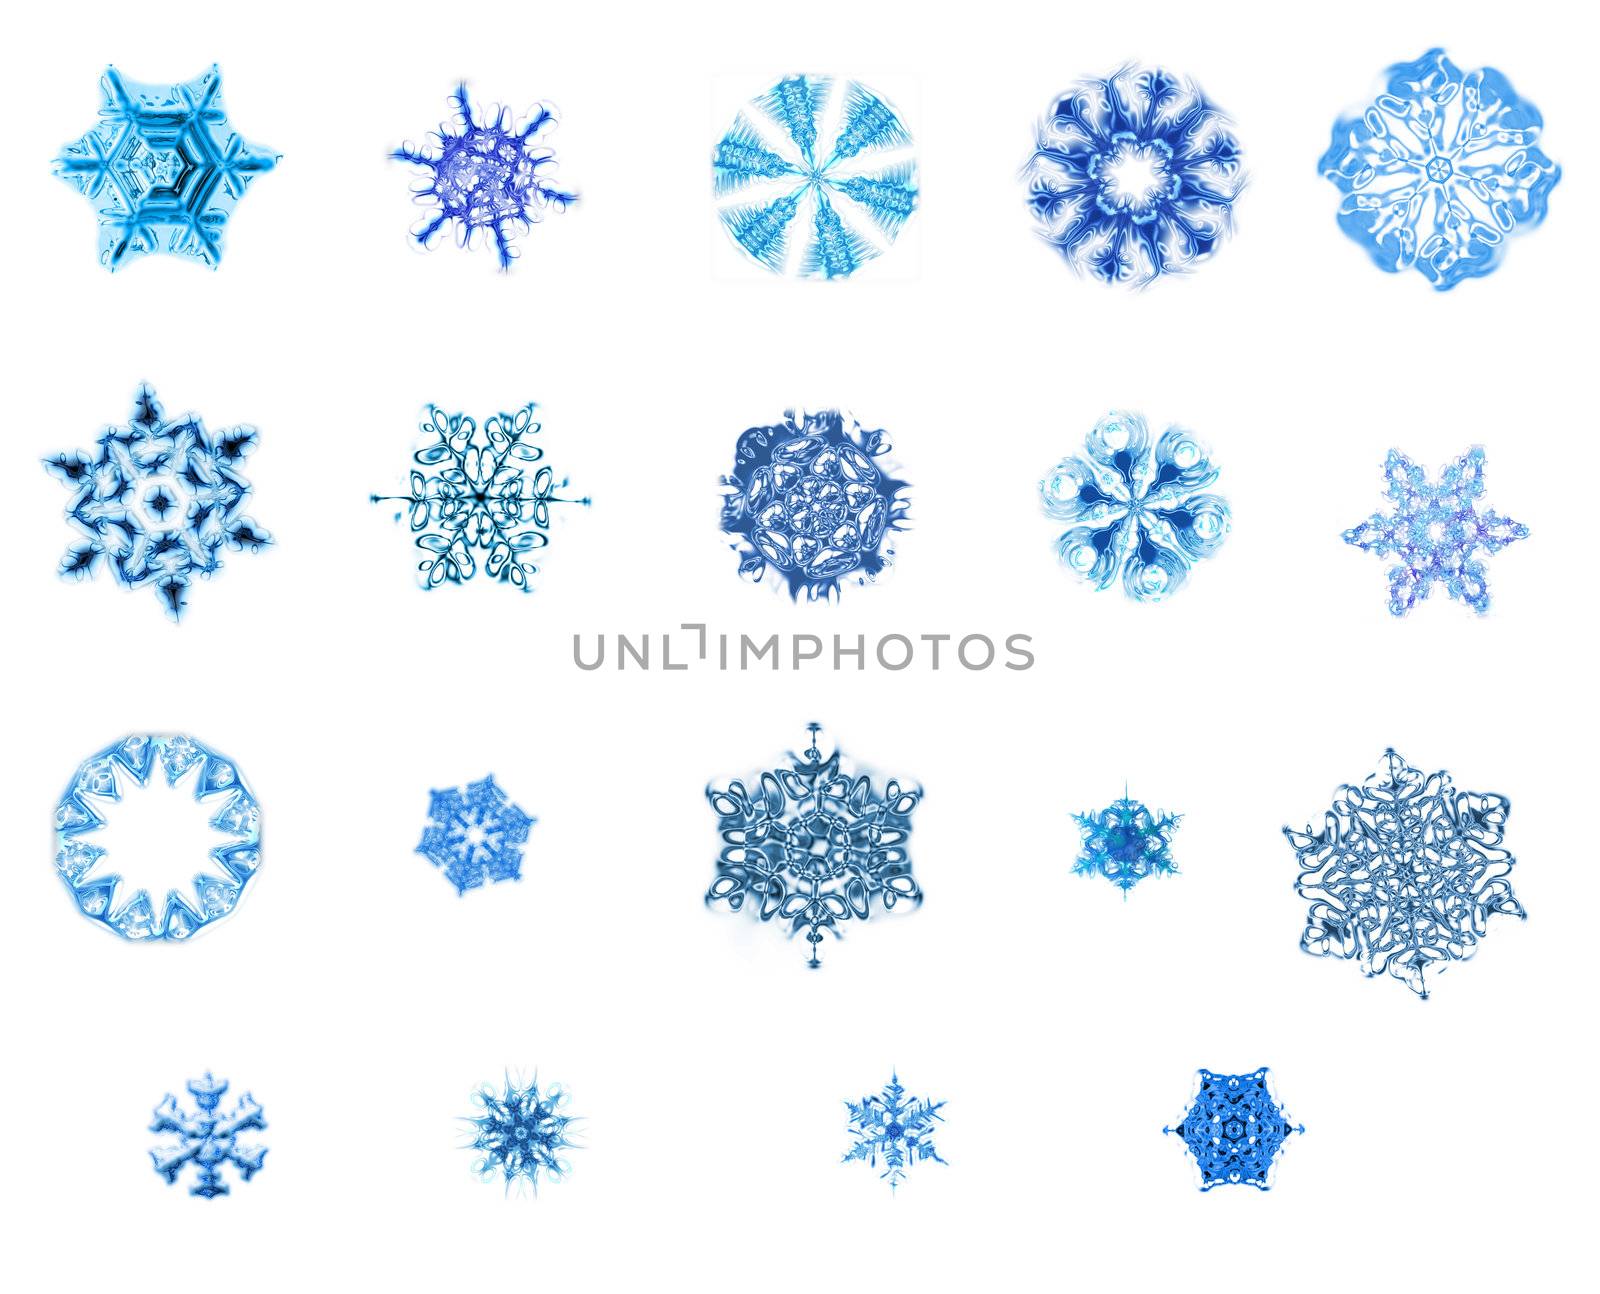 nice blue snow flakes isoletad on the white background